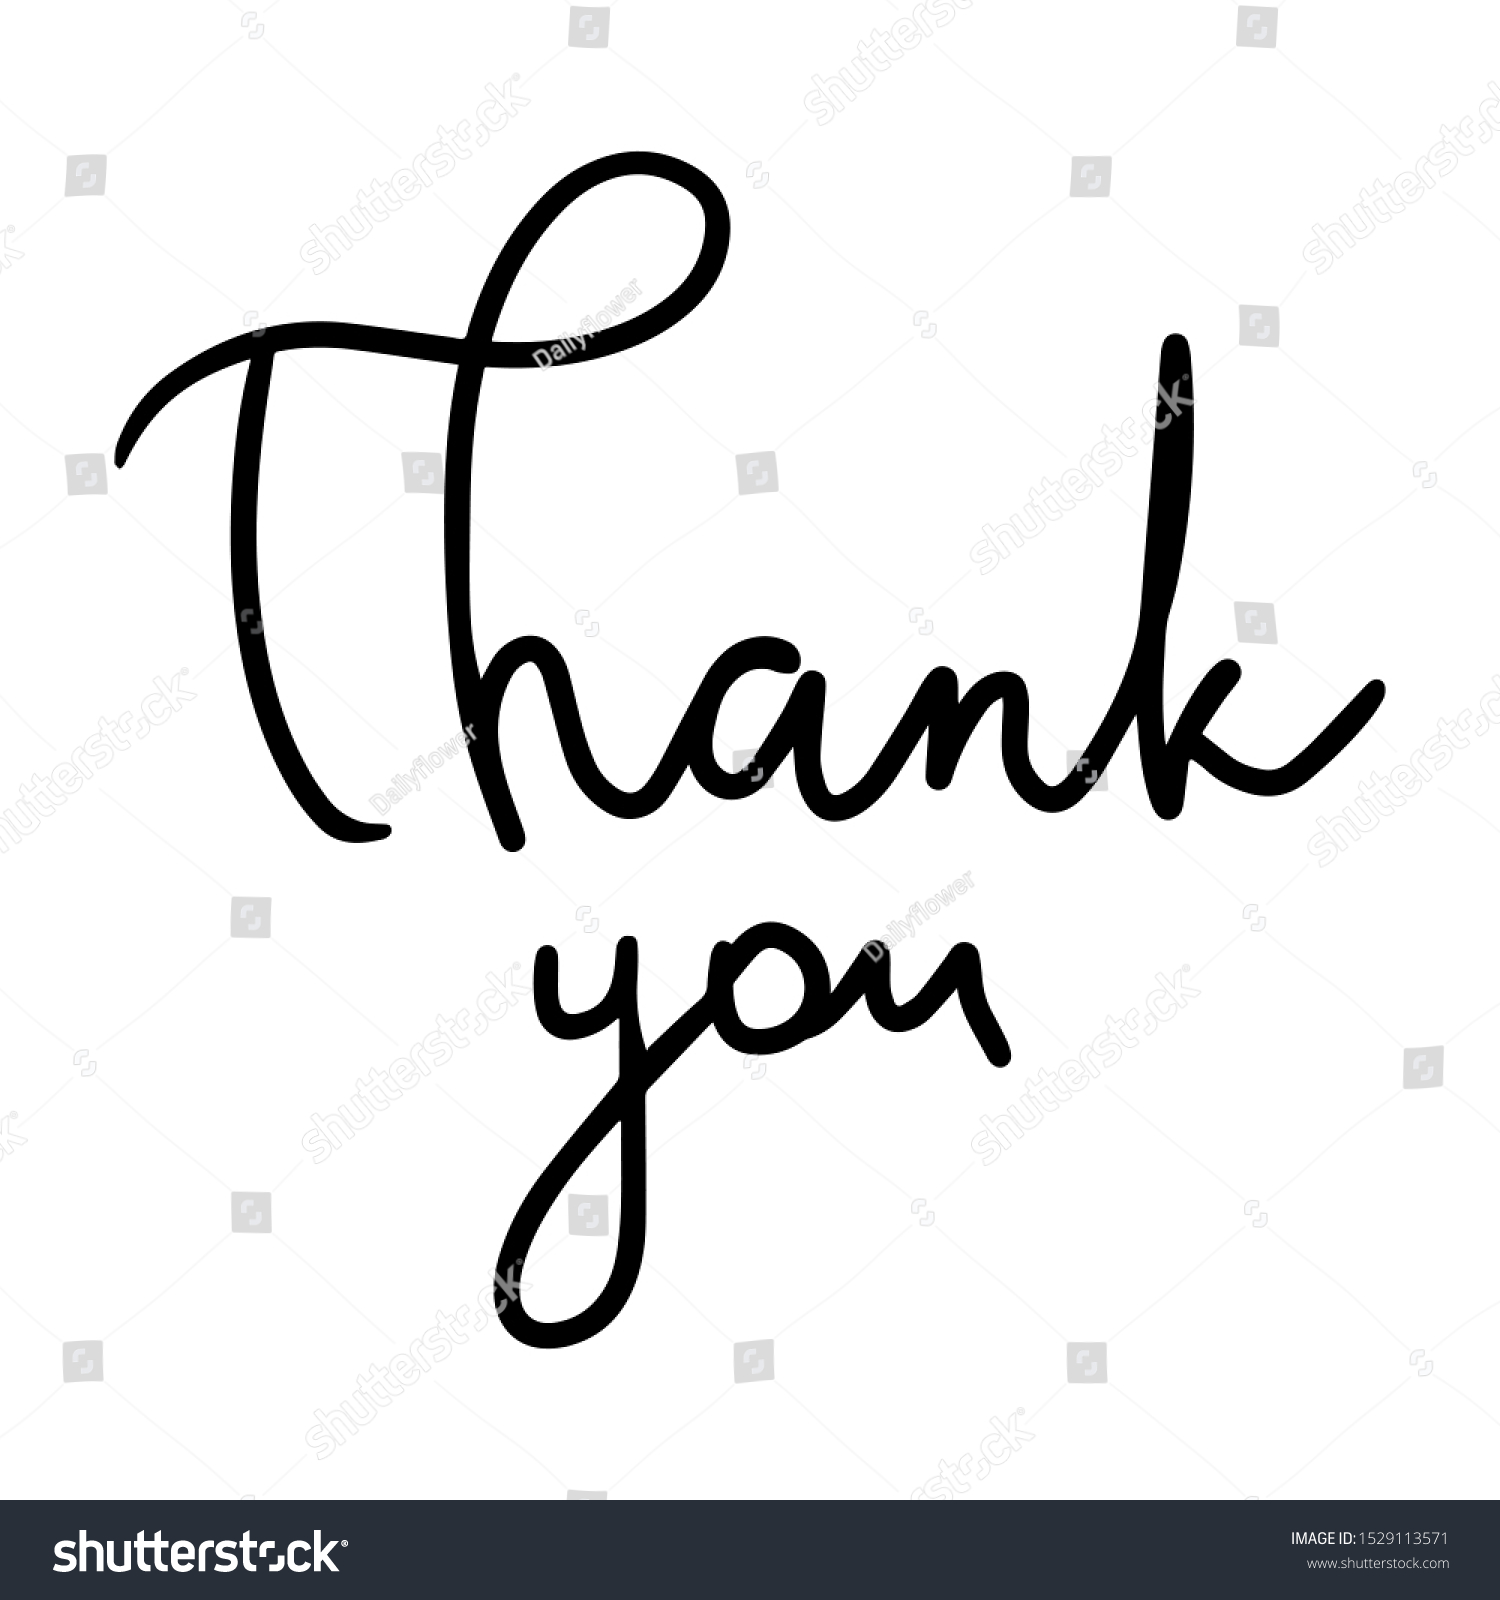 Thank You Hand Drawn Lettering Calligraphic Stock Vector Royalty Free 1529113571 Shutterstock 4121